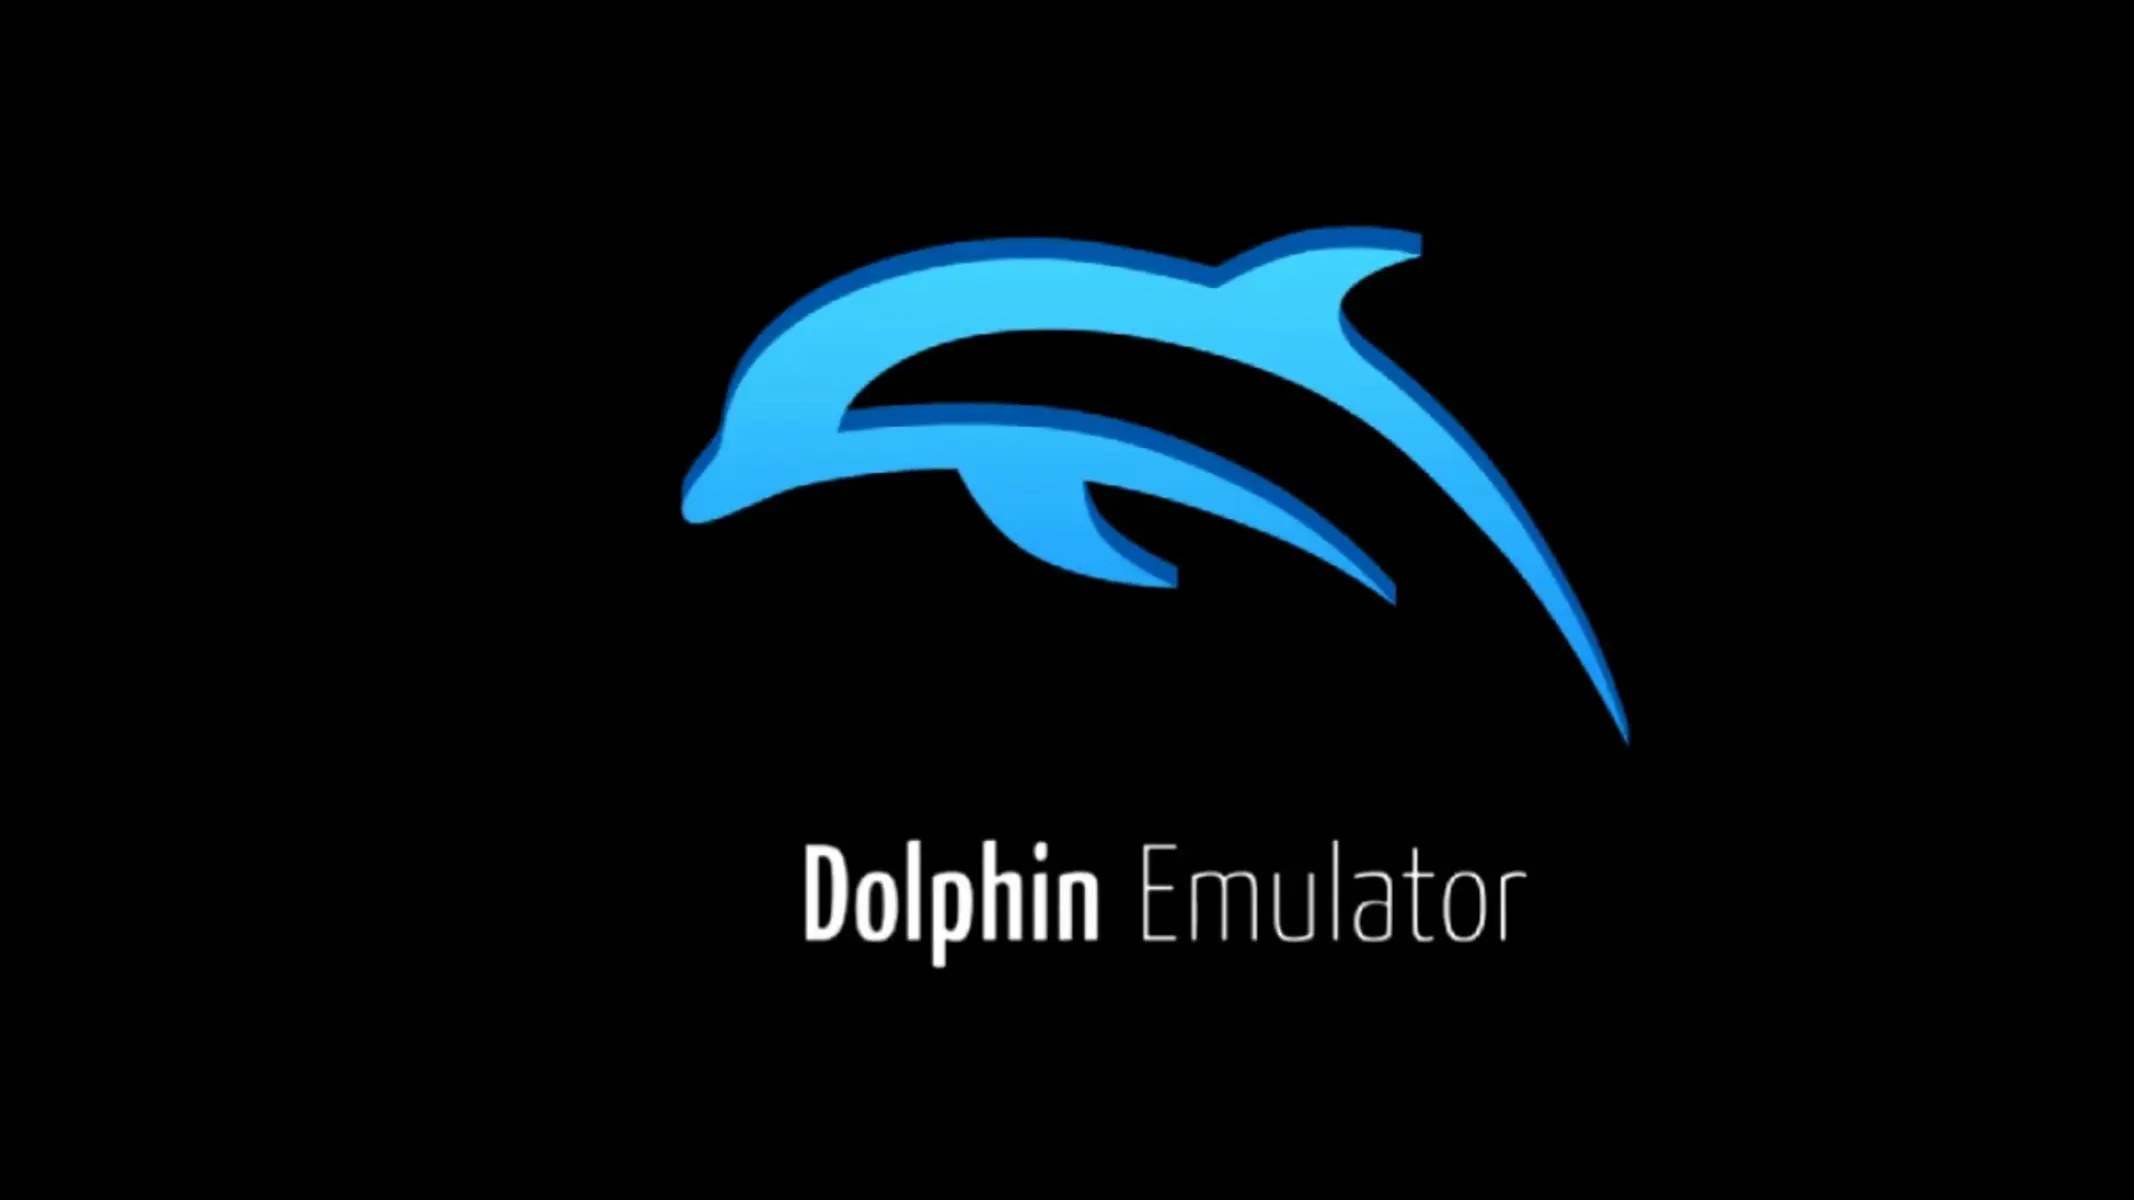 How To Use The Dolphin Emulator